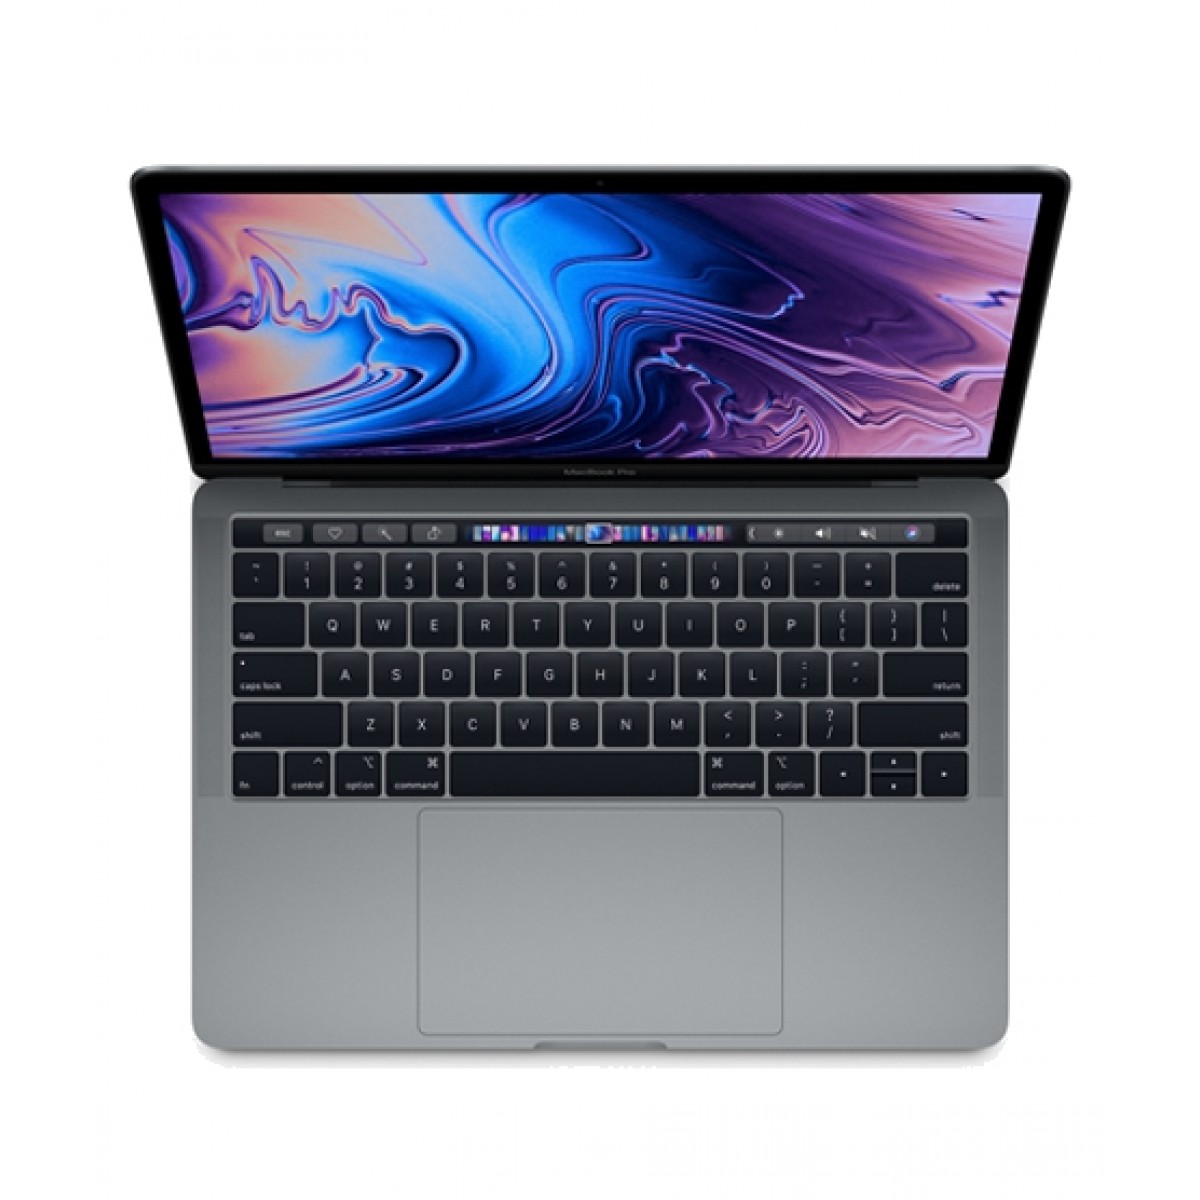 Used Apple MacBook Pro(touch bar) 8th Gen 13-inch 2019 in a very clean and neat condition with Intel Core i5 2.4Ghz processor, 16GB RAM, 512GB SSD Space Grey